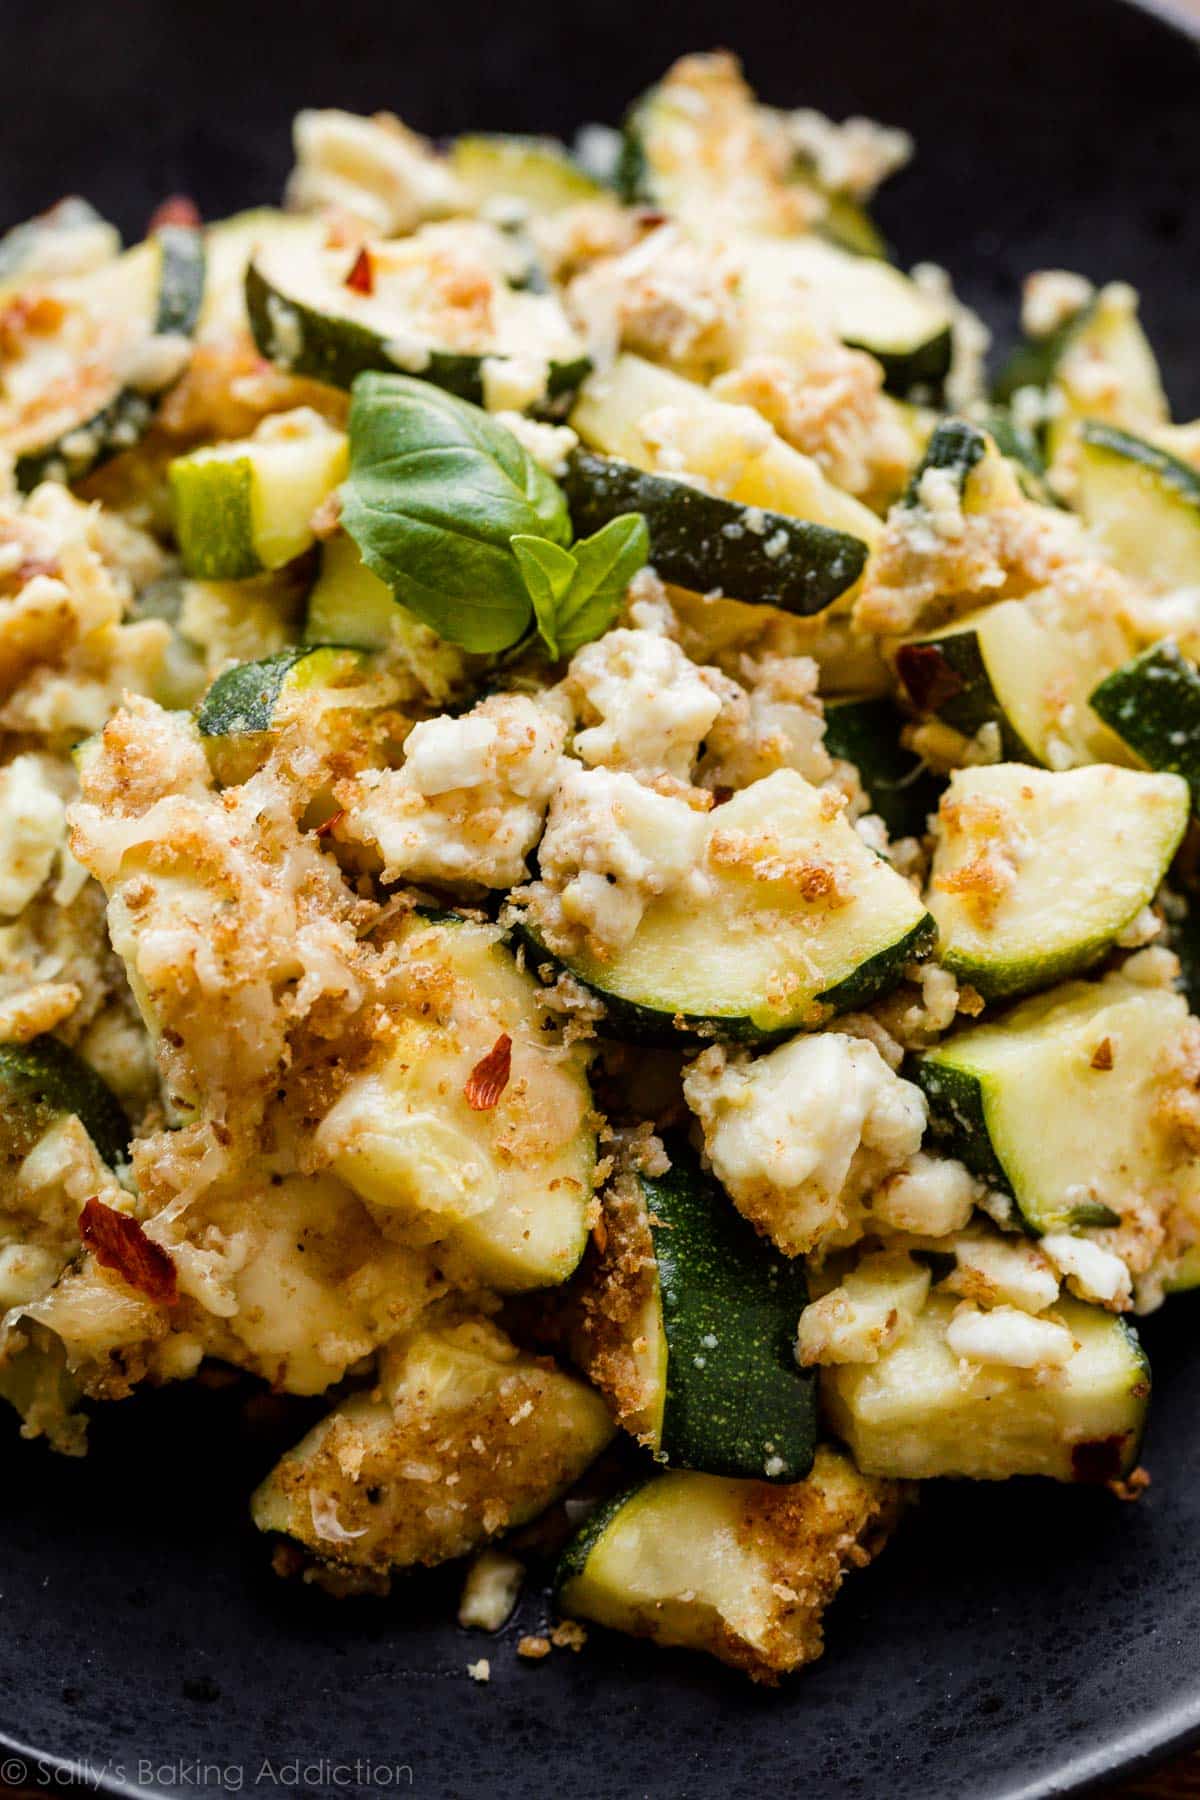 A side dish of baked zucchini feta served on a black plate